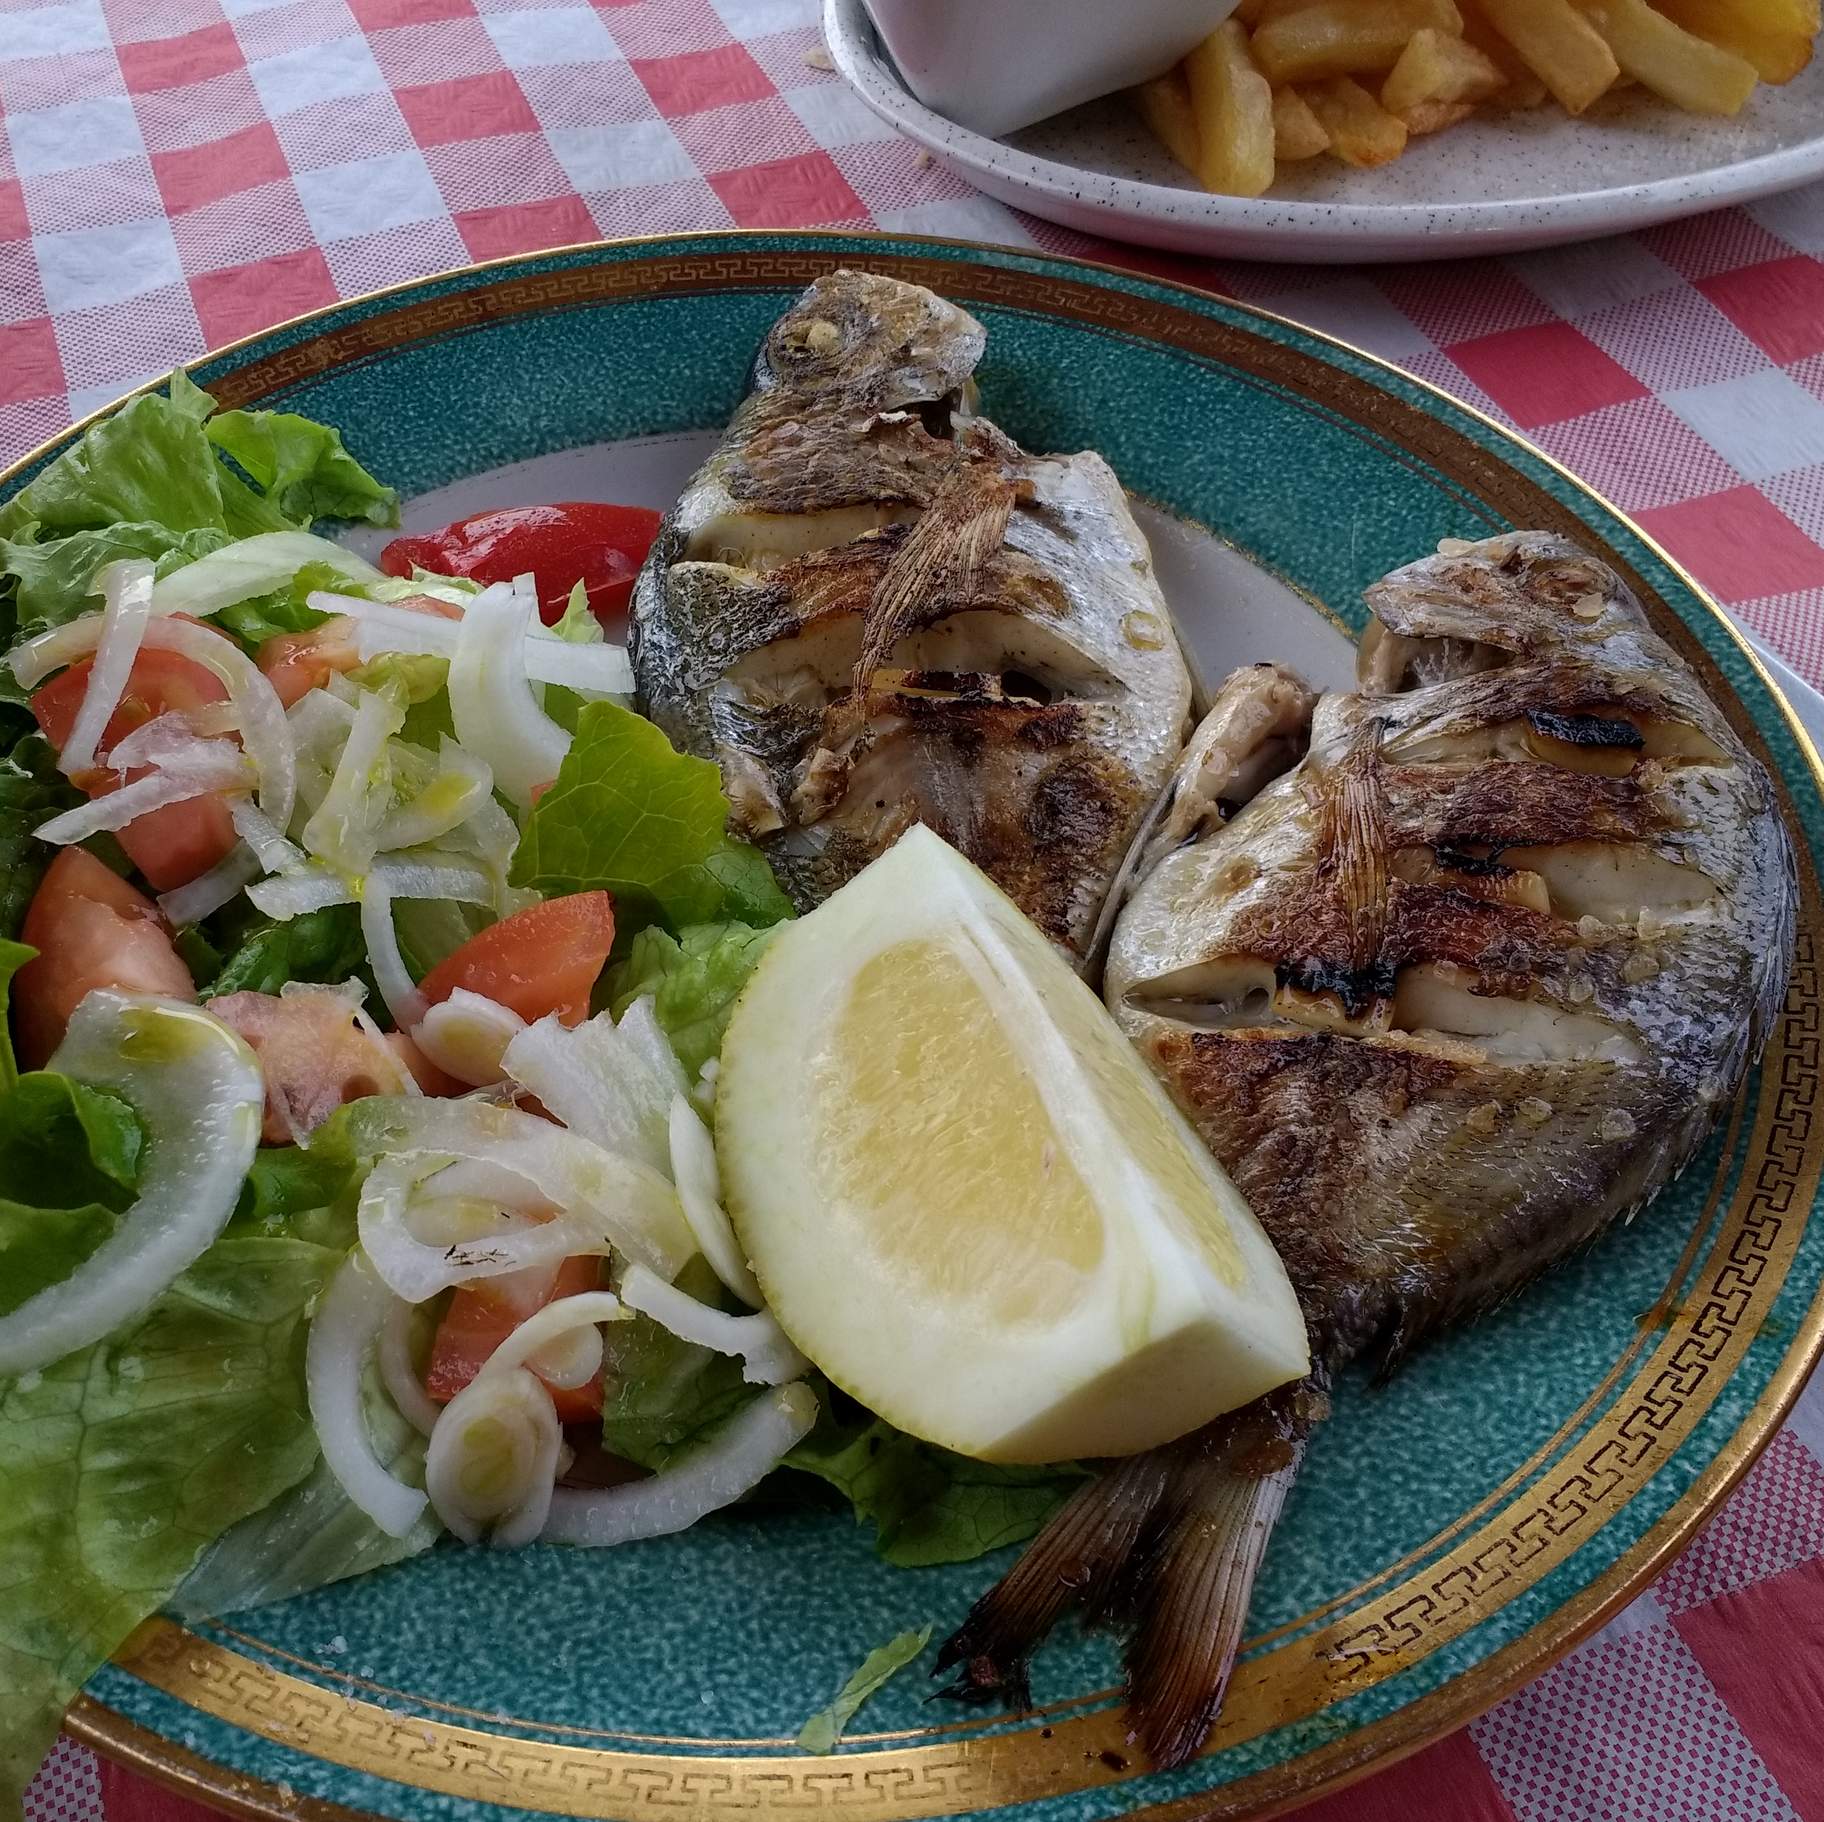 This menú de día included salad, fish, French fries, and wine.